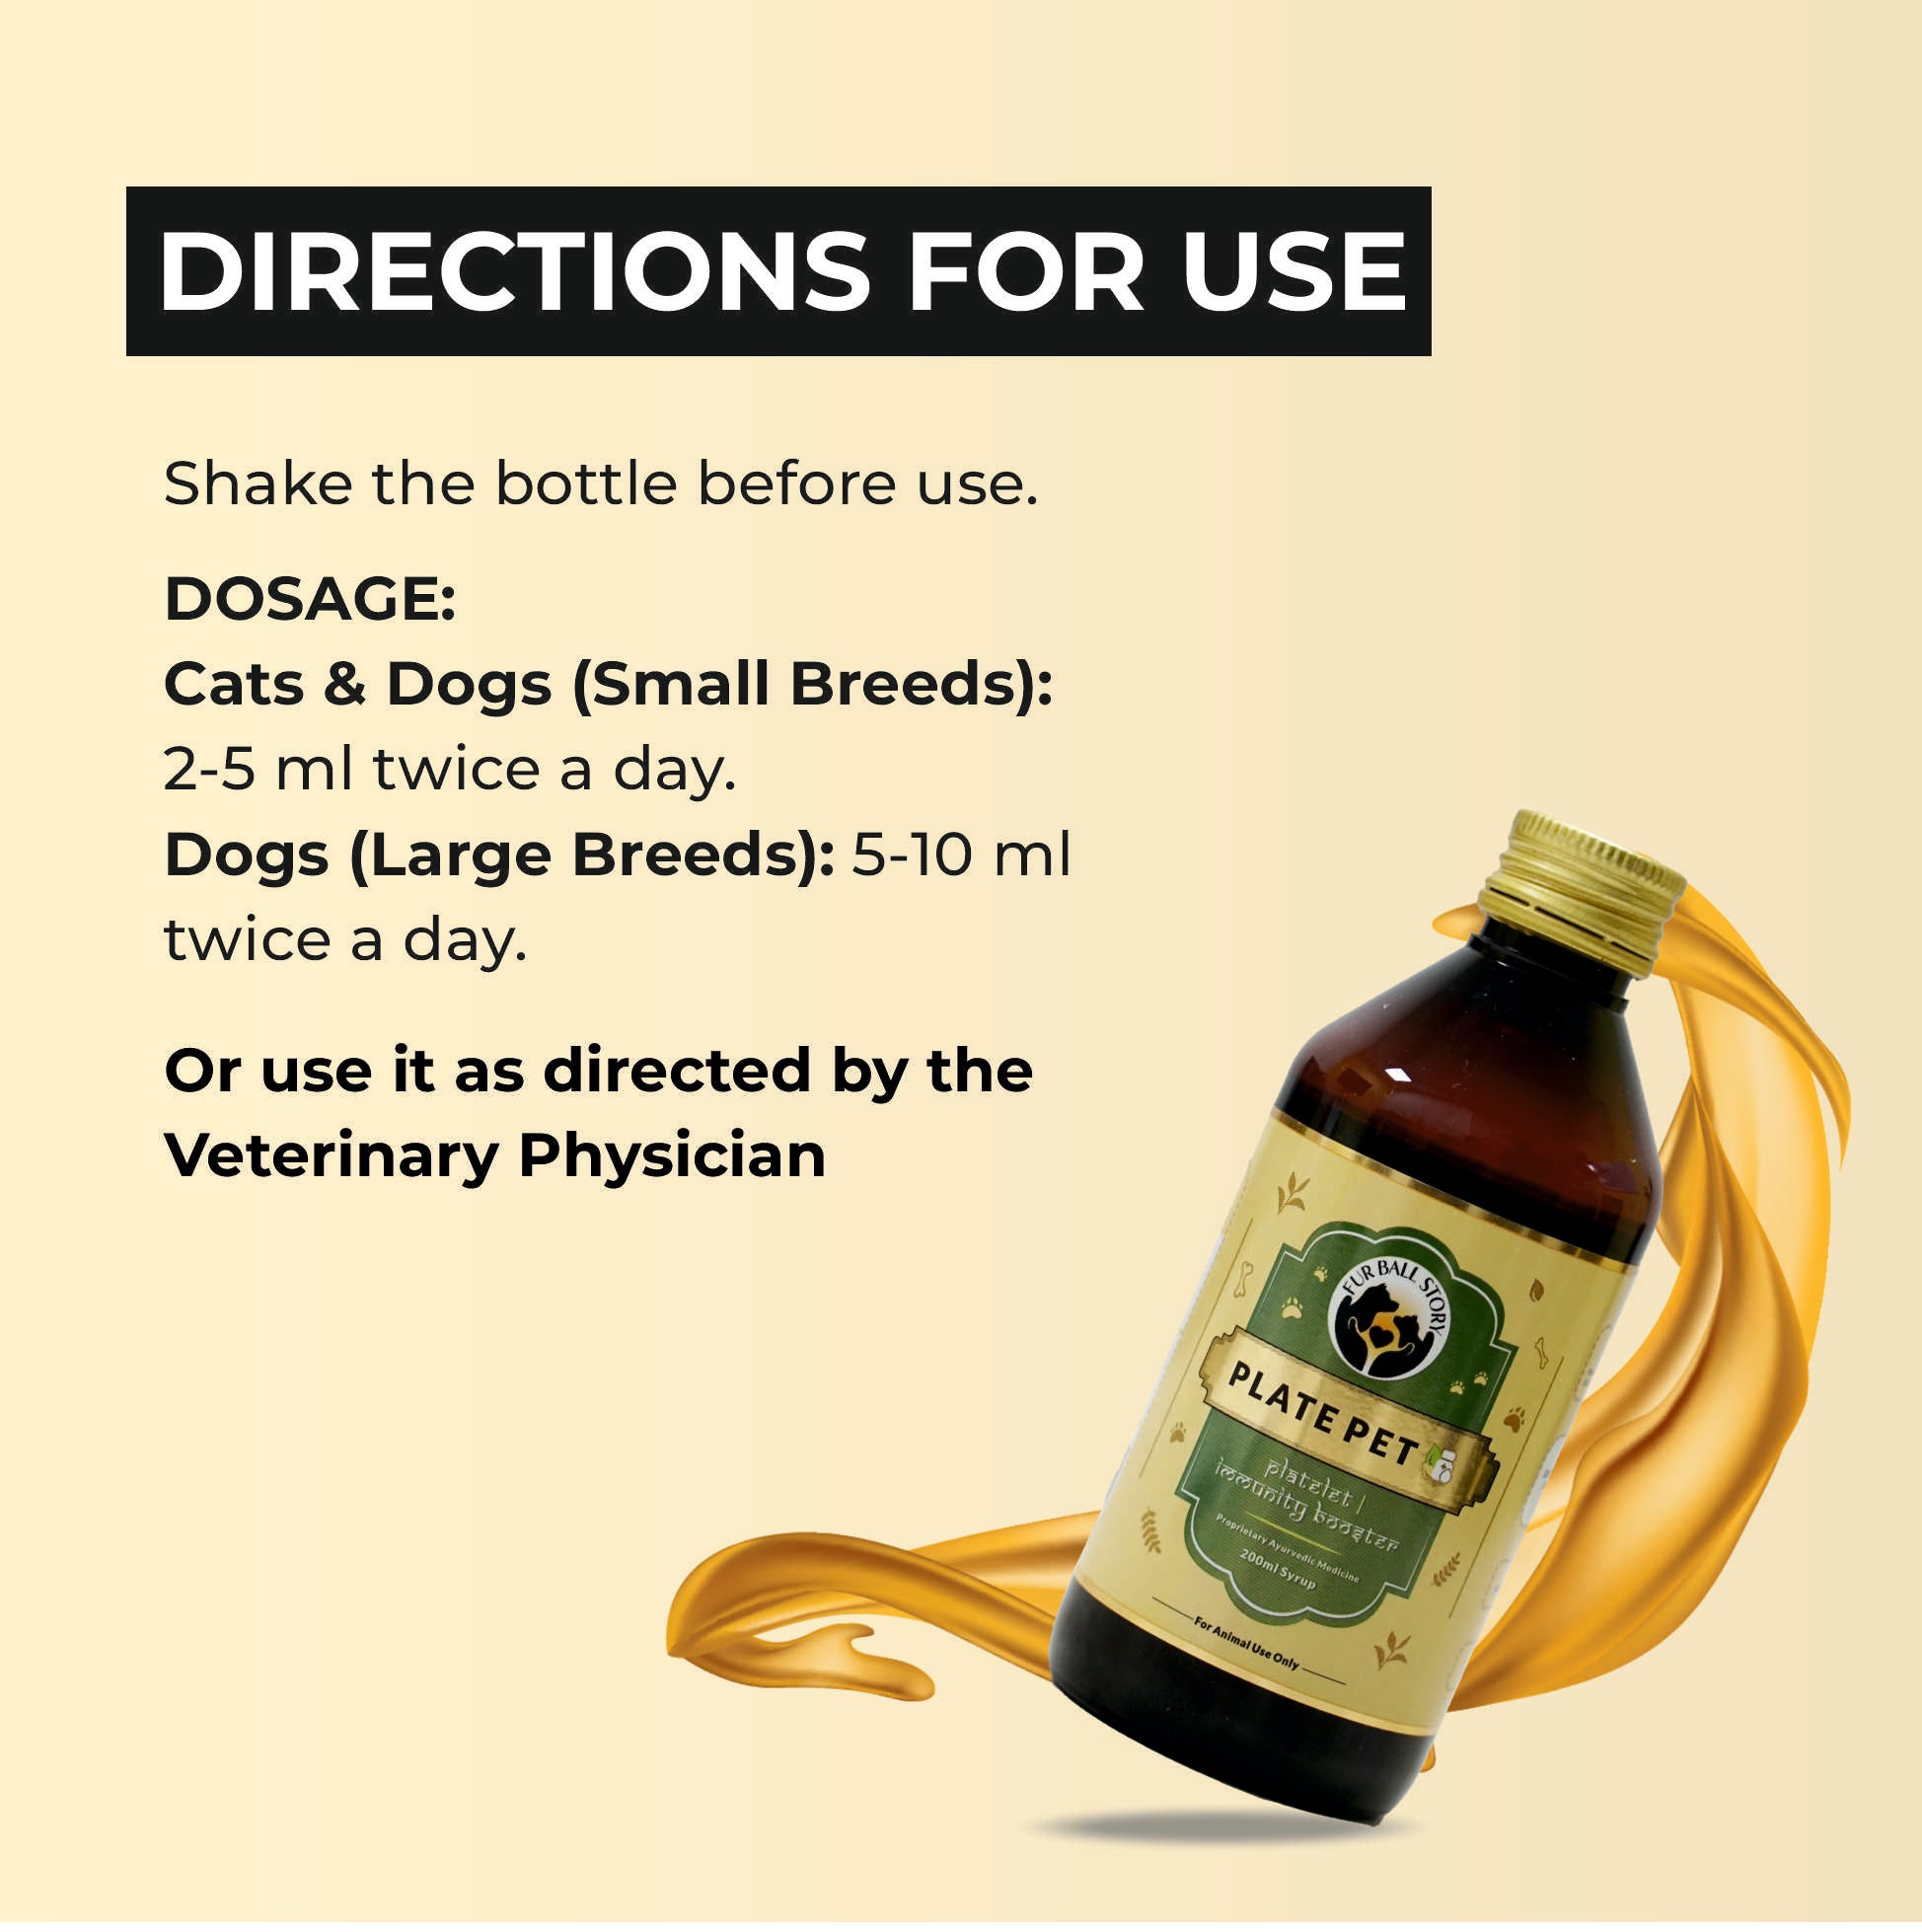 Directions to Use Plate Pet: immunity booster syrup for dogs 